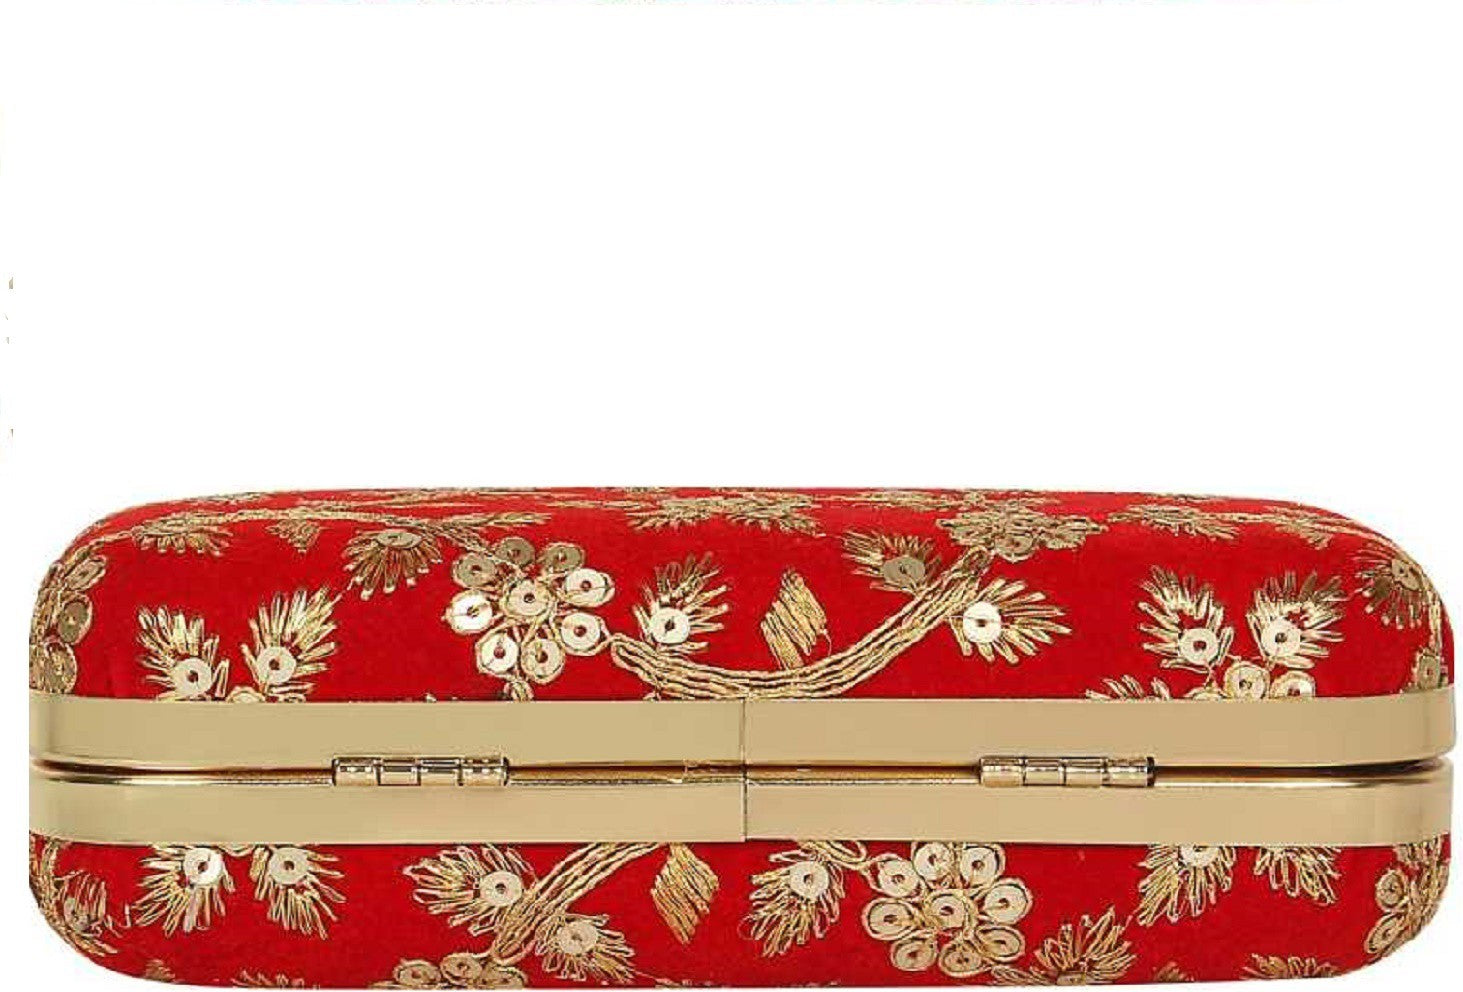 Women's Handicraft Party Wear Hand Embroidered Box Clutch Bag Purse For Bridal, Casual, Party, Wedding - Ritzie